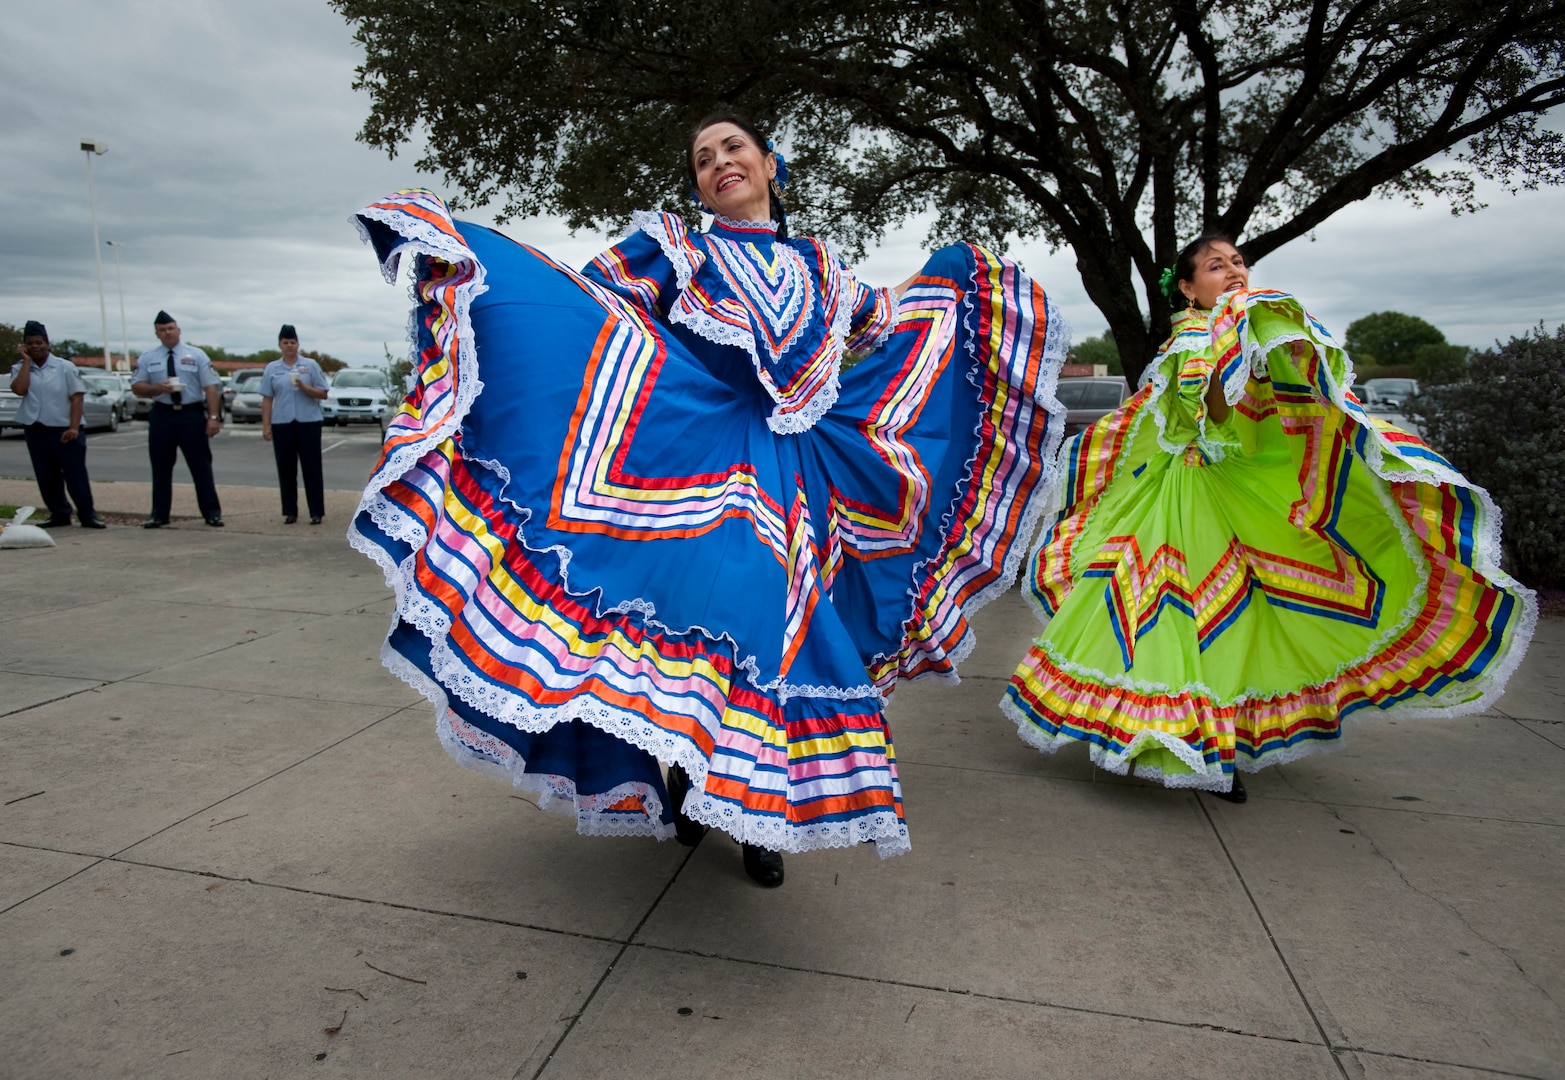 Laura Sanchez and Eva Saliz, Mexican Folklorico dancers with Grupo Amistad sponsored by the University of the Incarnate Word, perform Sept. 14 during the Randolph Hispanic Heritage Month kickoff, an event filled with music, folkloric dancing, a salsa competition and a sampling of Hispanic cuisine. (U.S. Air Force photo/Steve Thurow) 